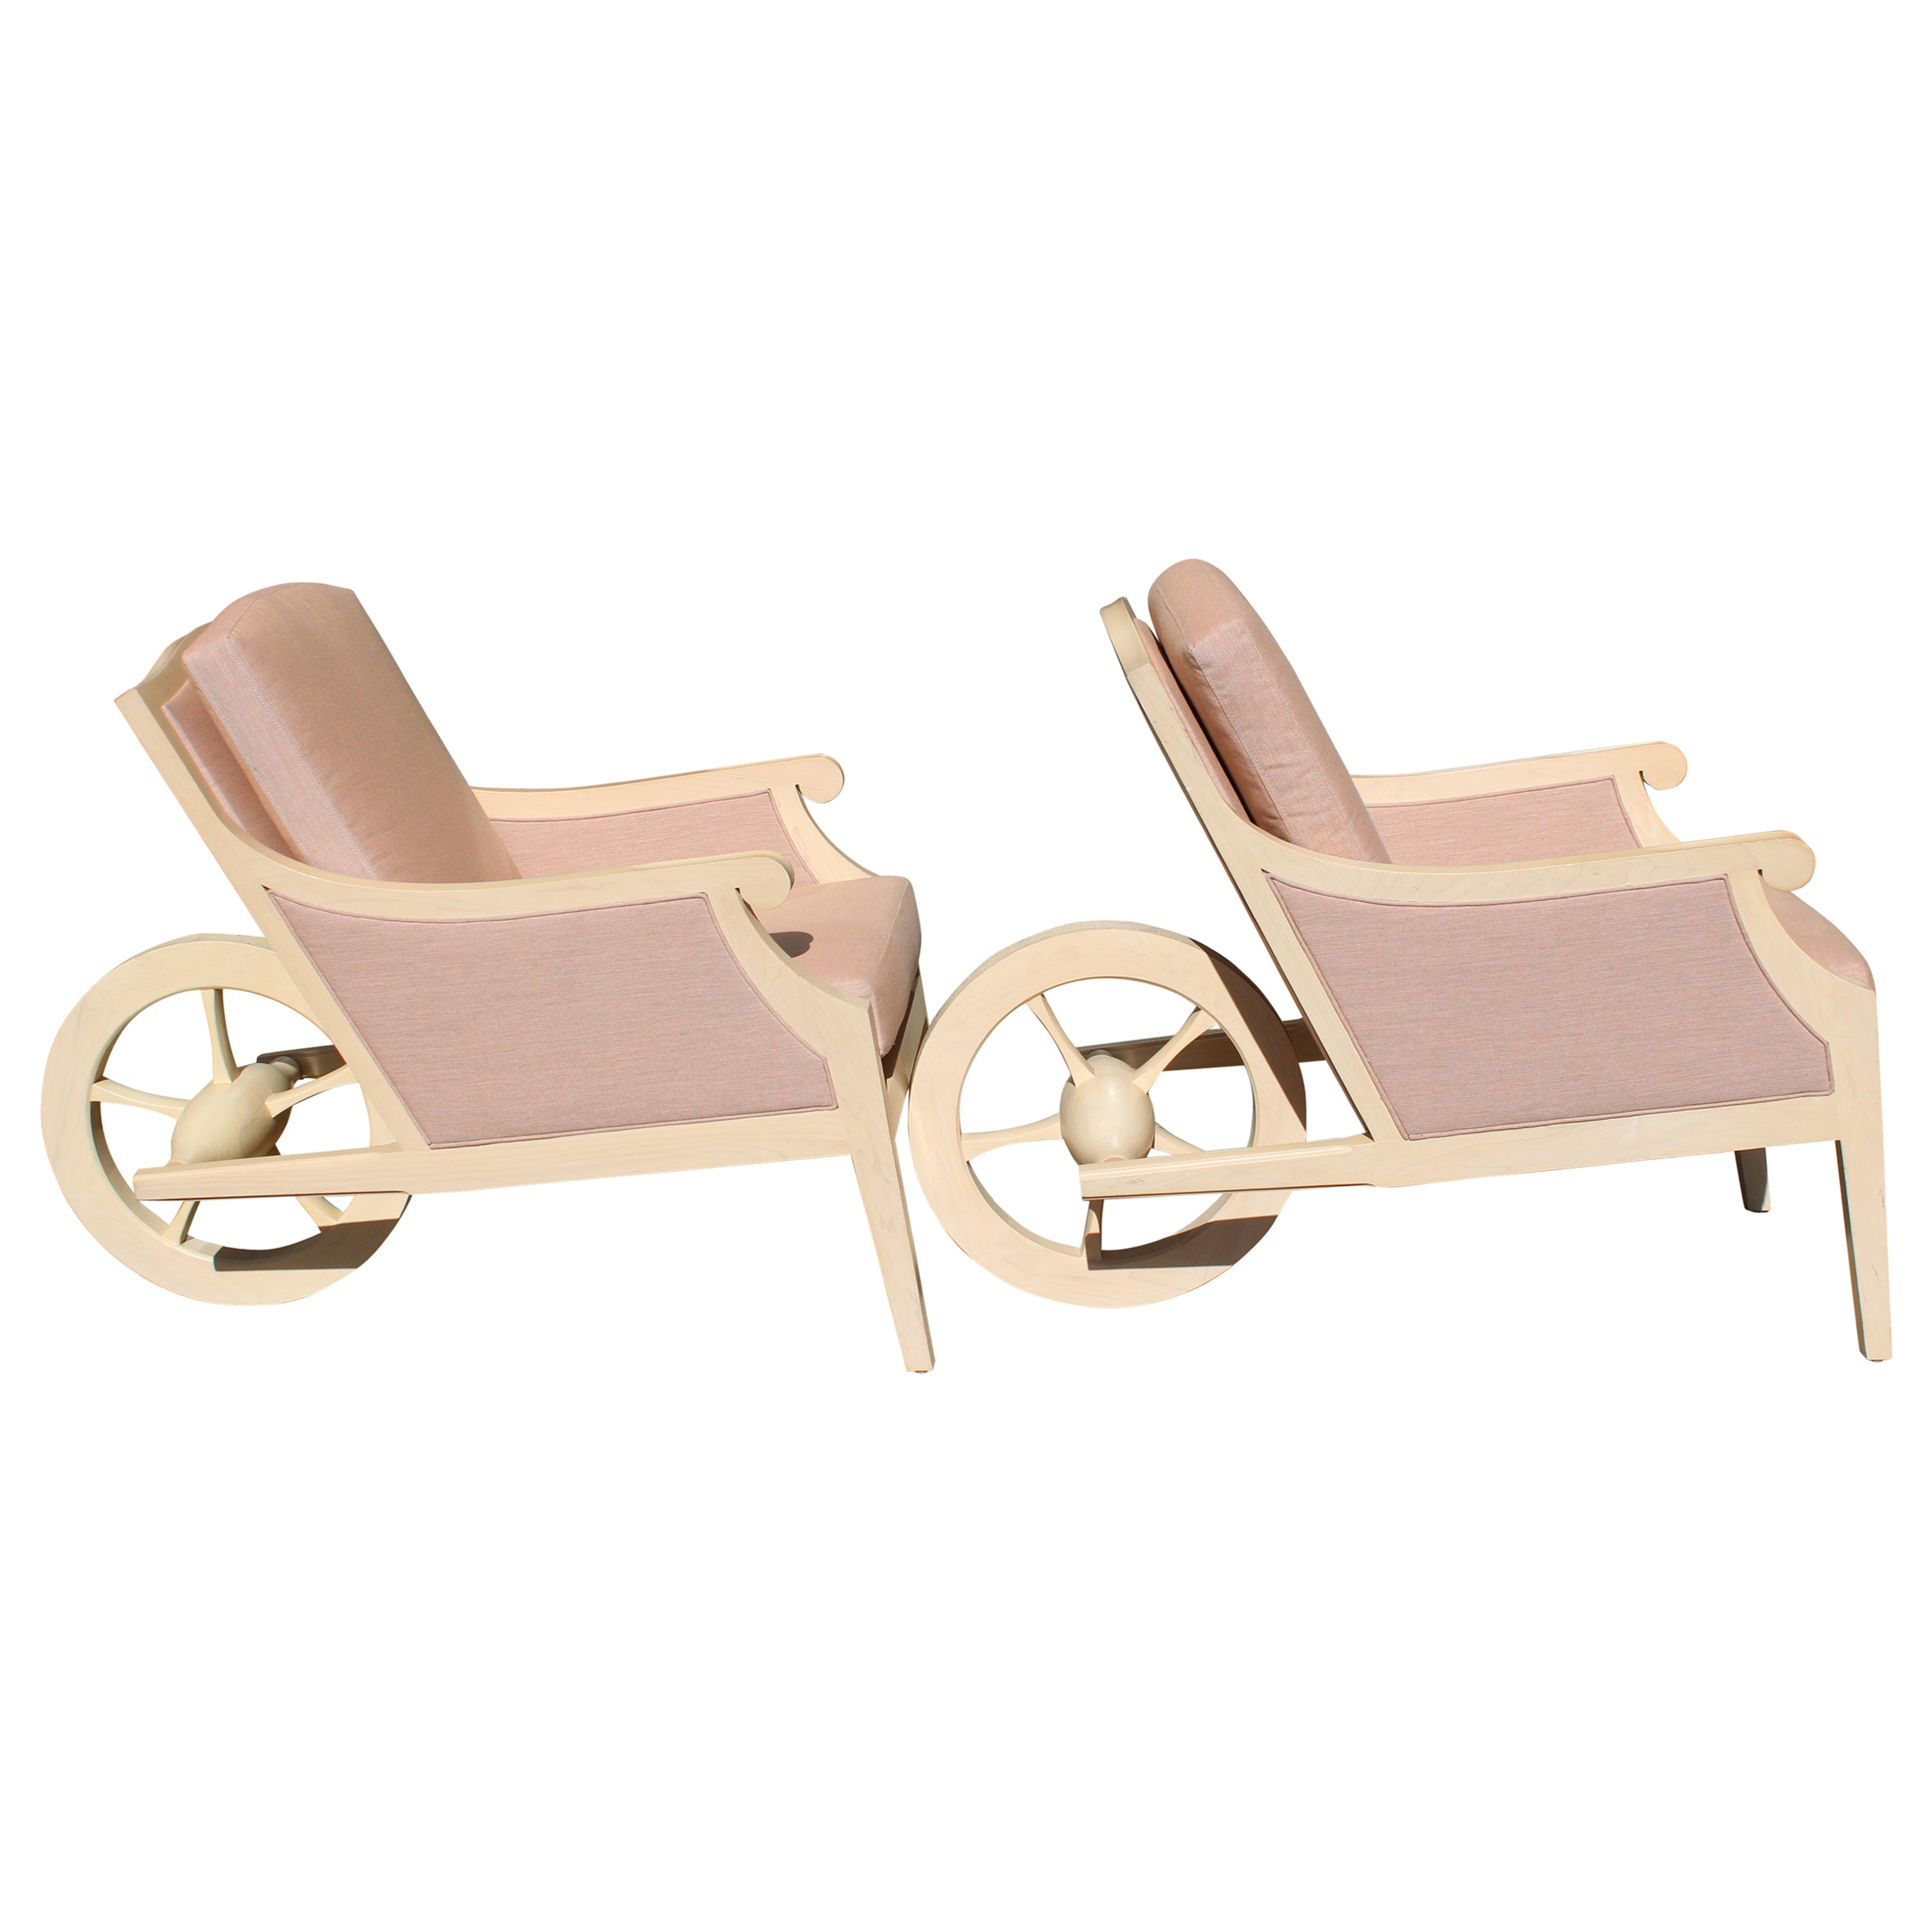 Pair of "Man Ray" Chairs by Philippe Starck for the Clift Hotel, San Francisco For Sale